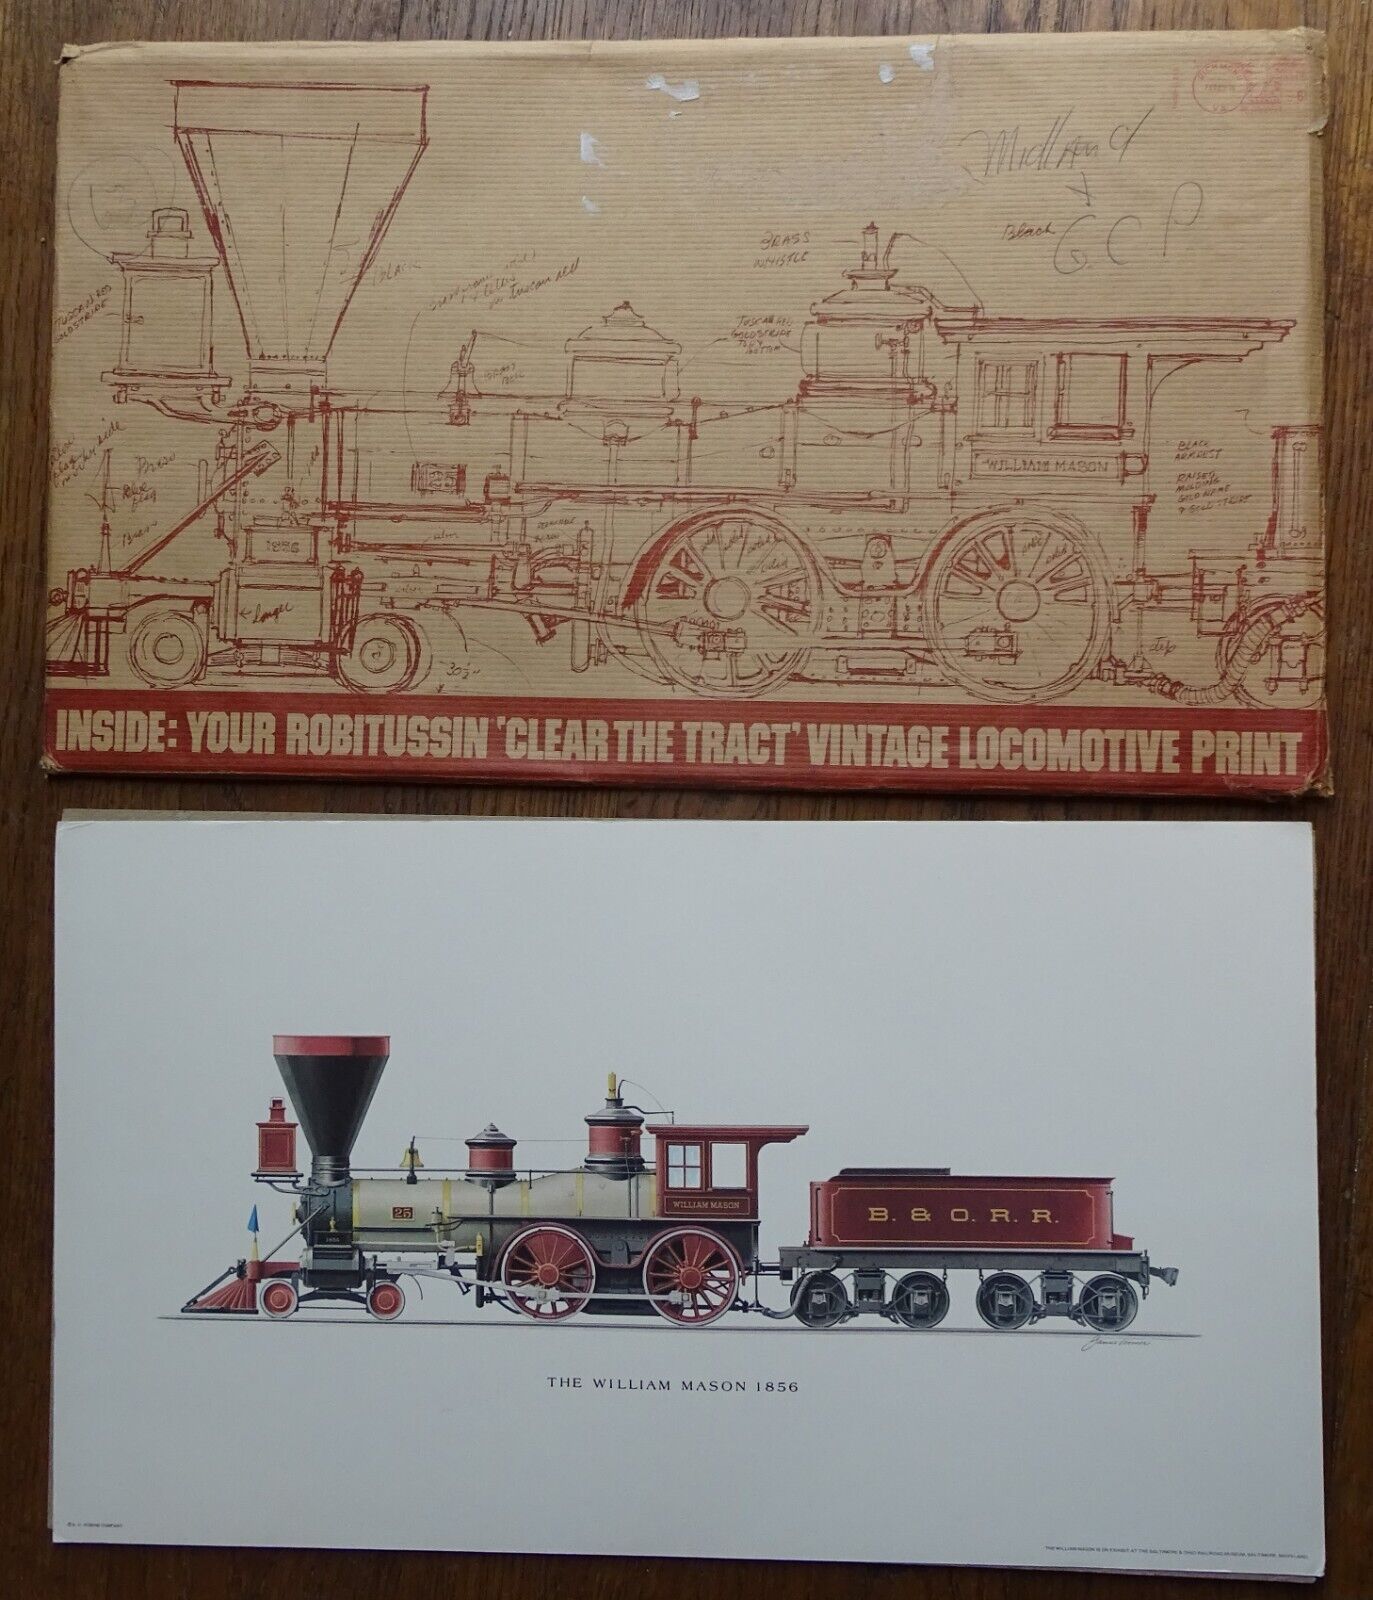 Robitussin 'Clear The Tract' Vintage Locomotive Print The William Mason By Womer